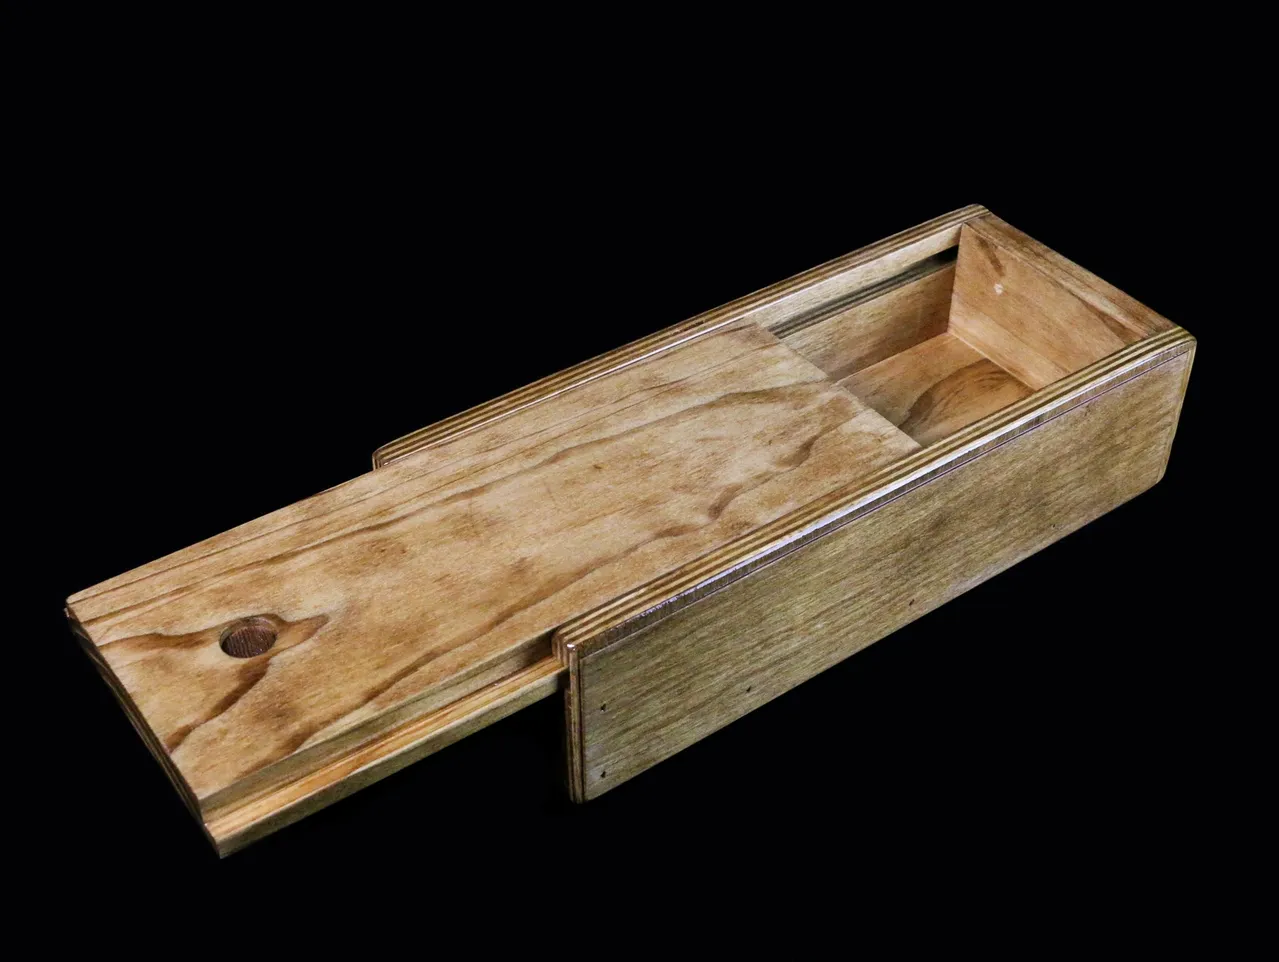 A wooden box with a sliding lid on top of it.